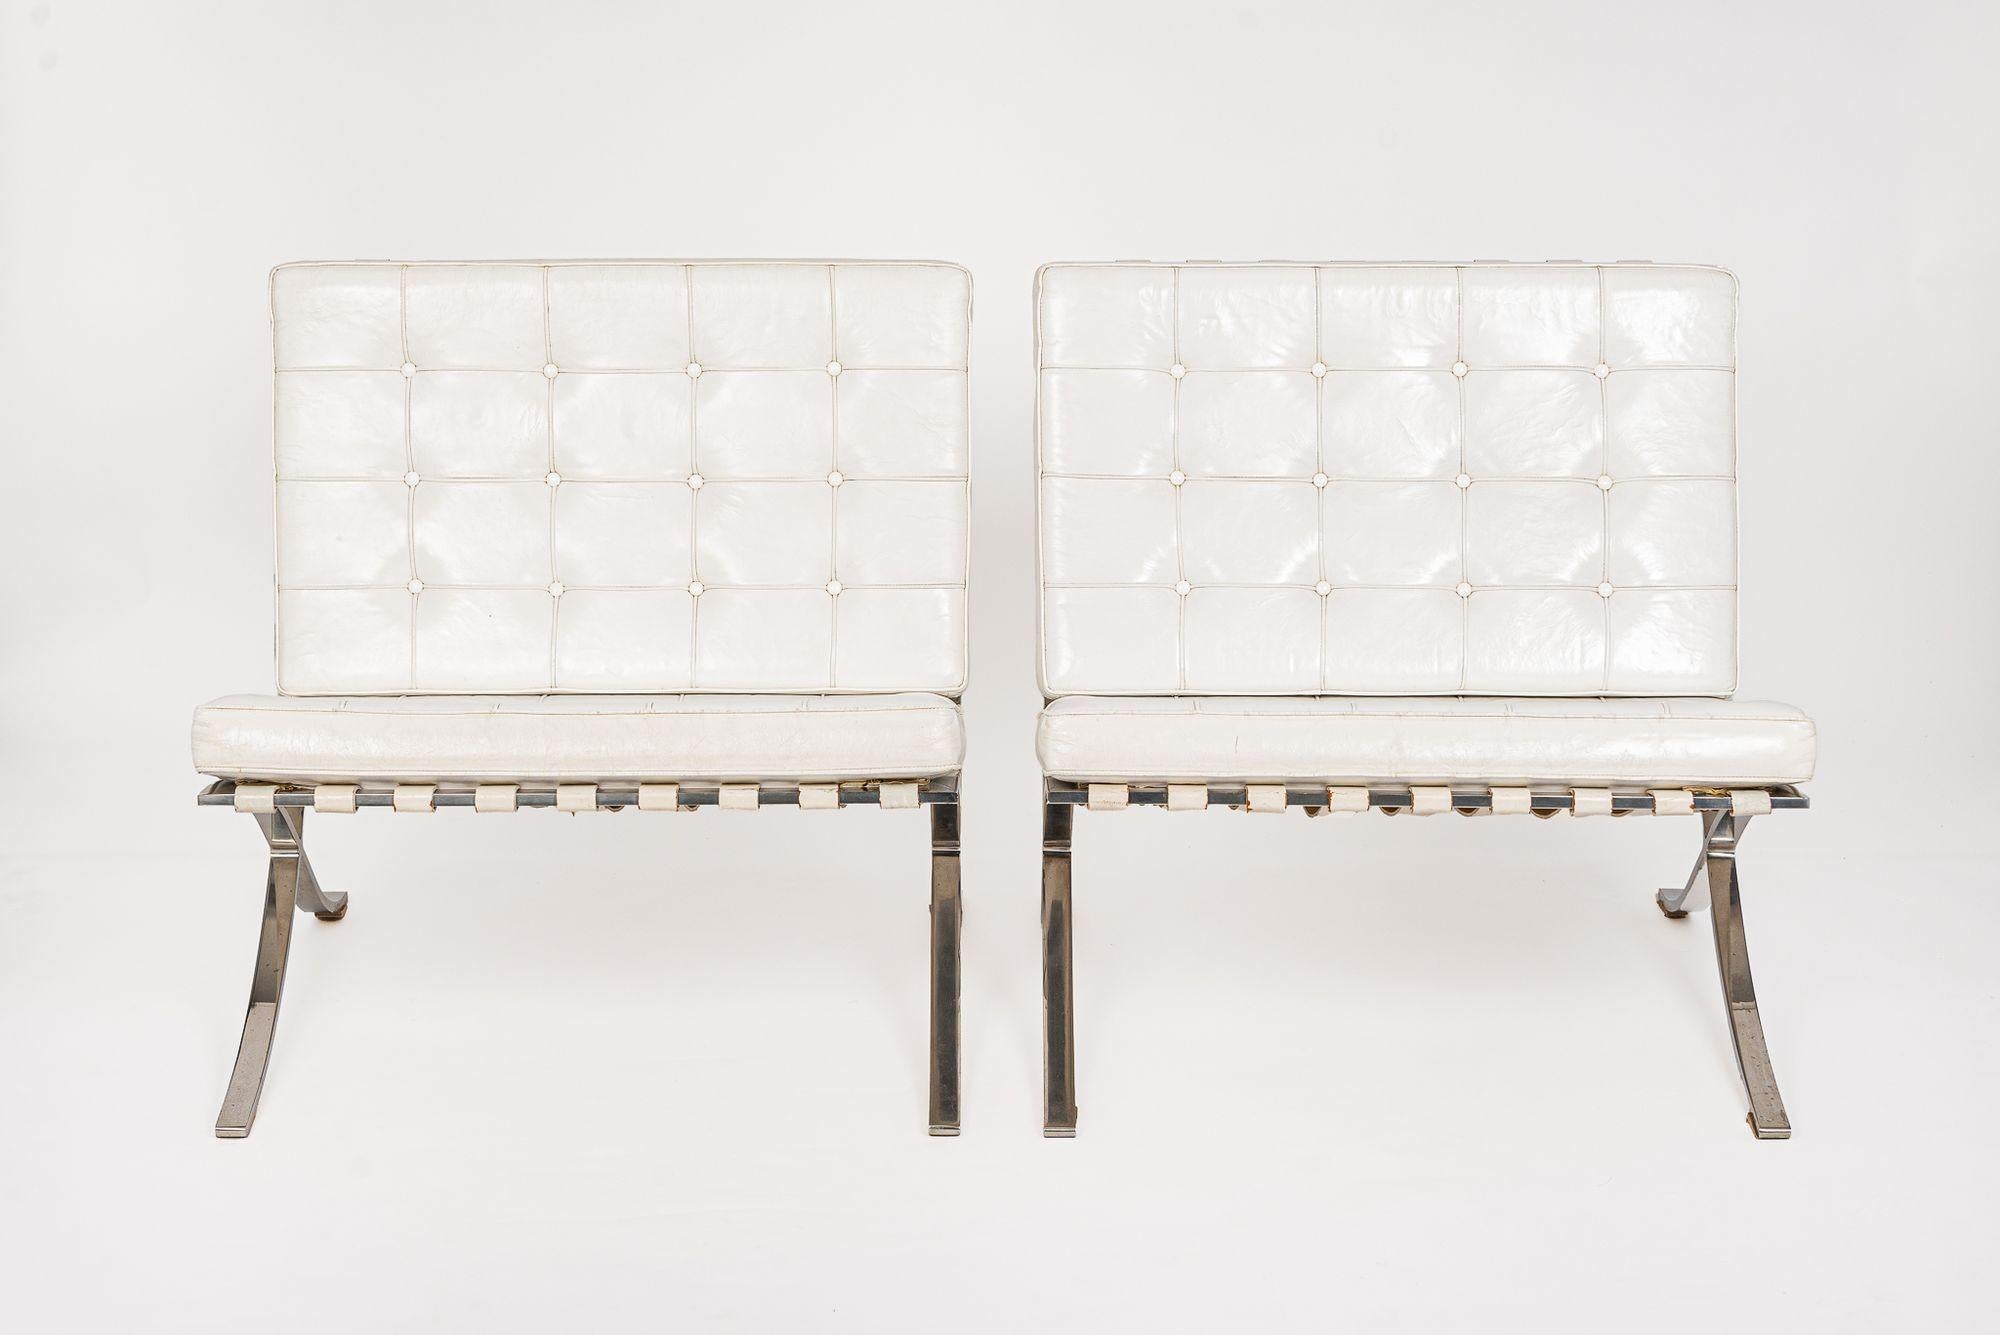 This pair of vintage mid century modern white Barcelona chairs designed by Mies van der Rohe were manufactured by Knoll International, Inc. circa 1970. This iconic Bauhaus chair originally designed by Ludwig Mies van der Rohe in 1929 for the